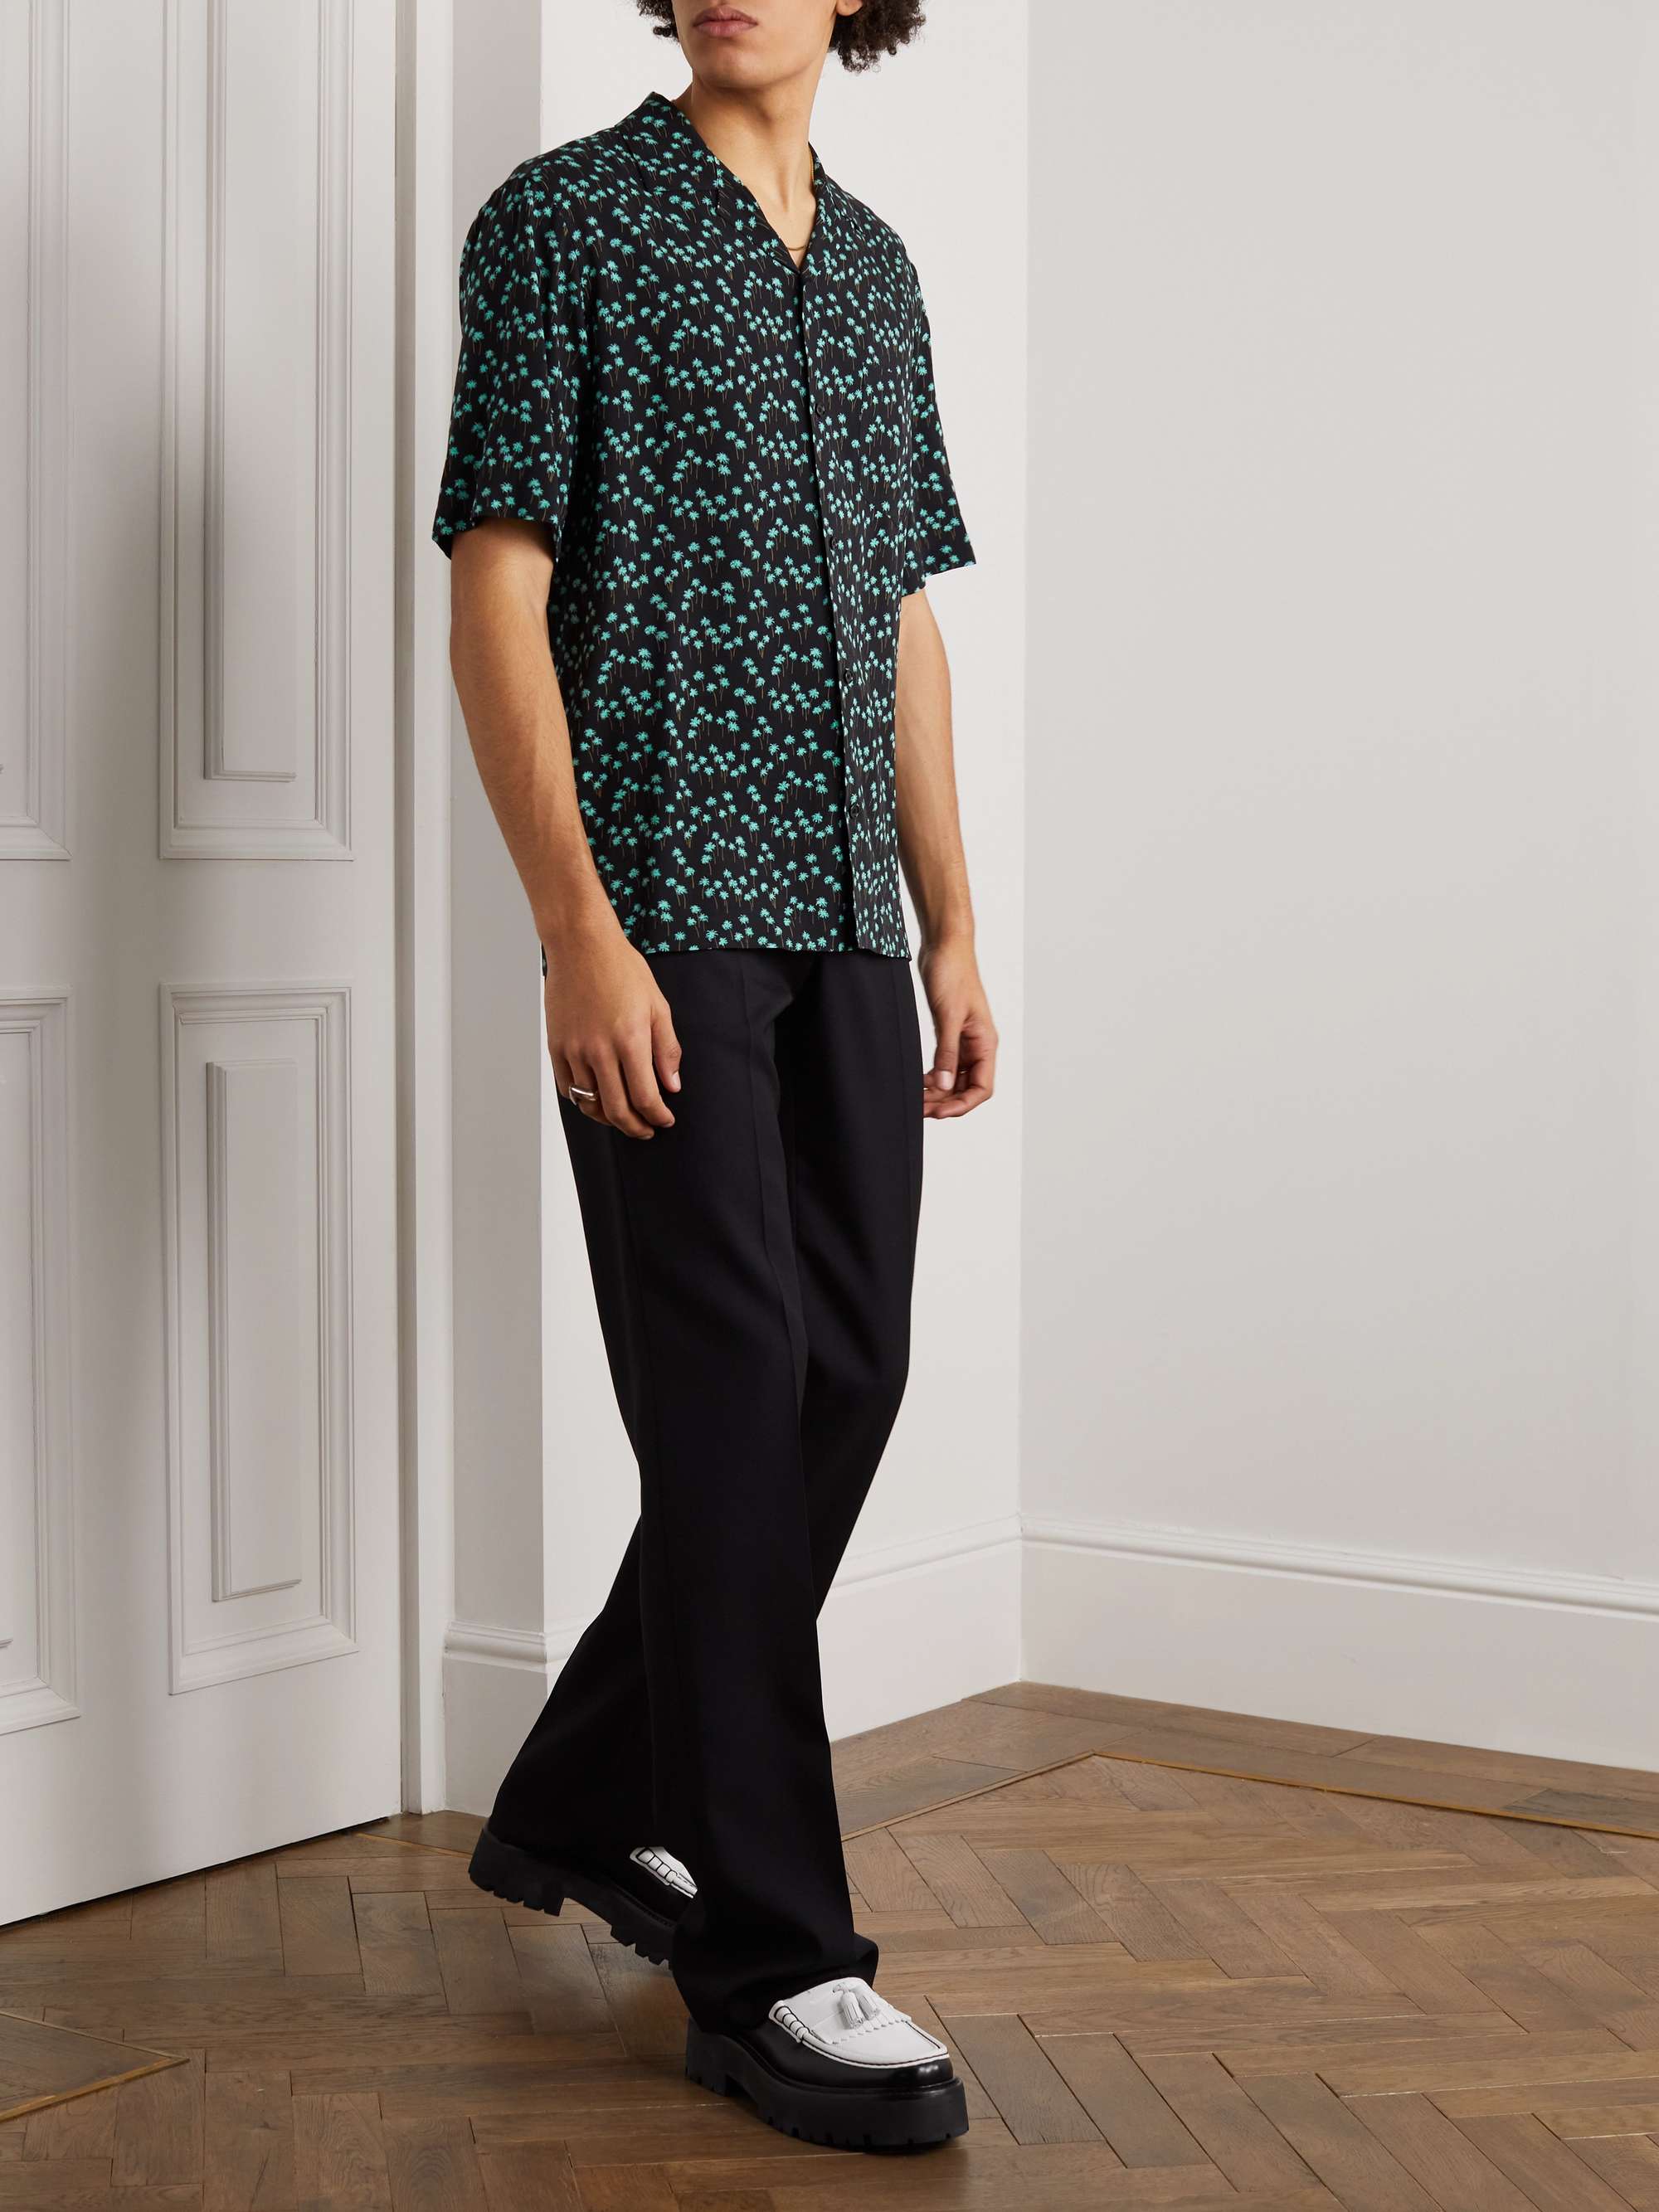 CELINE HOMME Convertible-Collar Printed Crepe Shirt